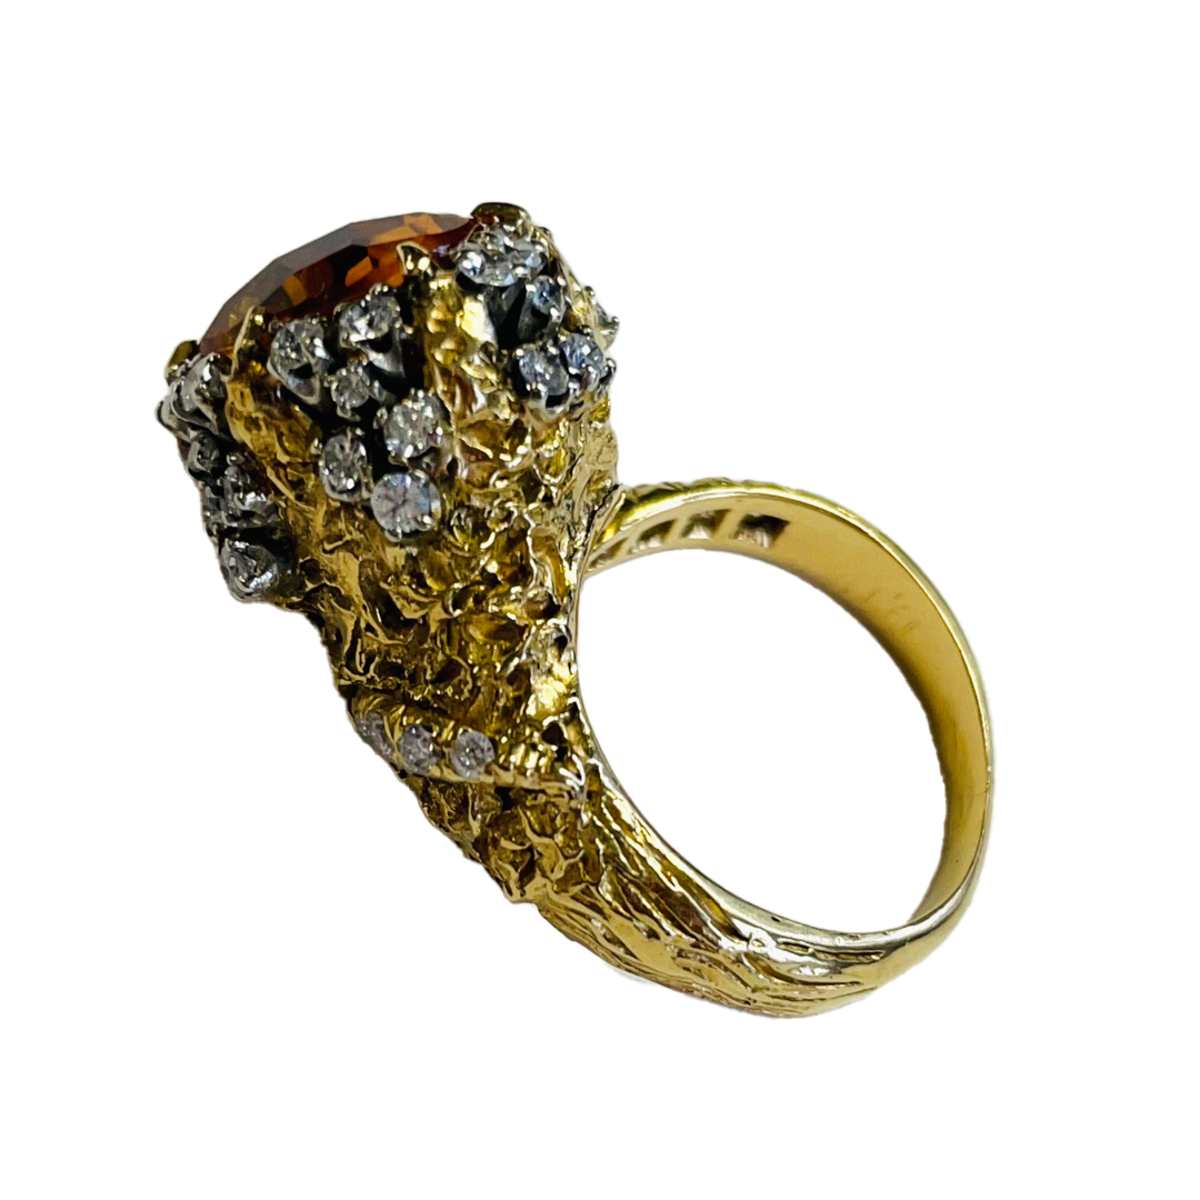 1960s 14KT Yellow Gold Citrine & Diamond Ring side view